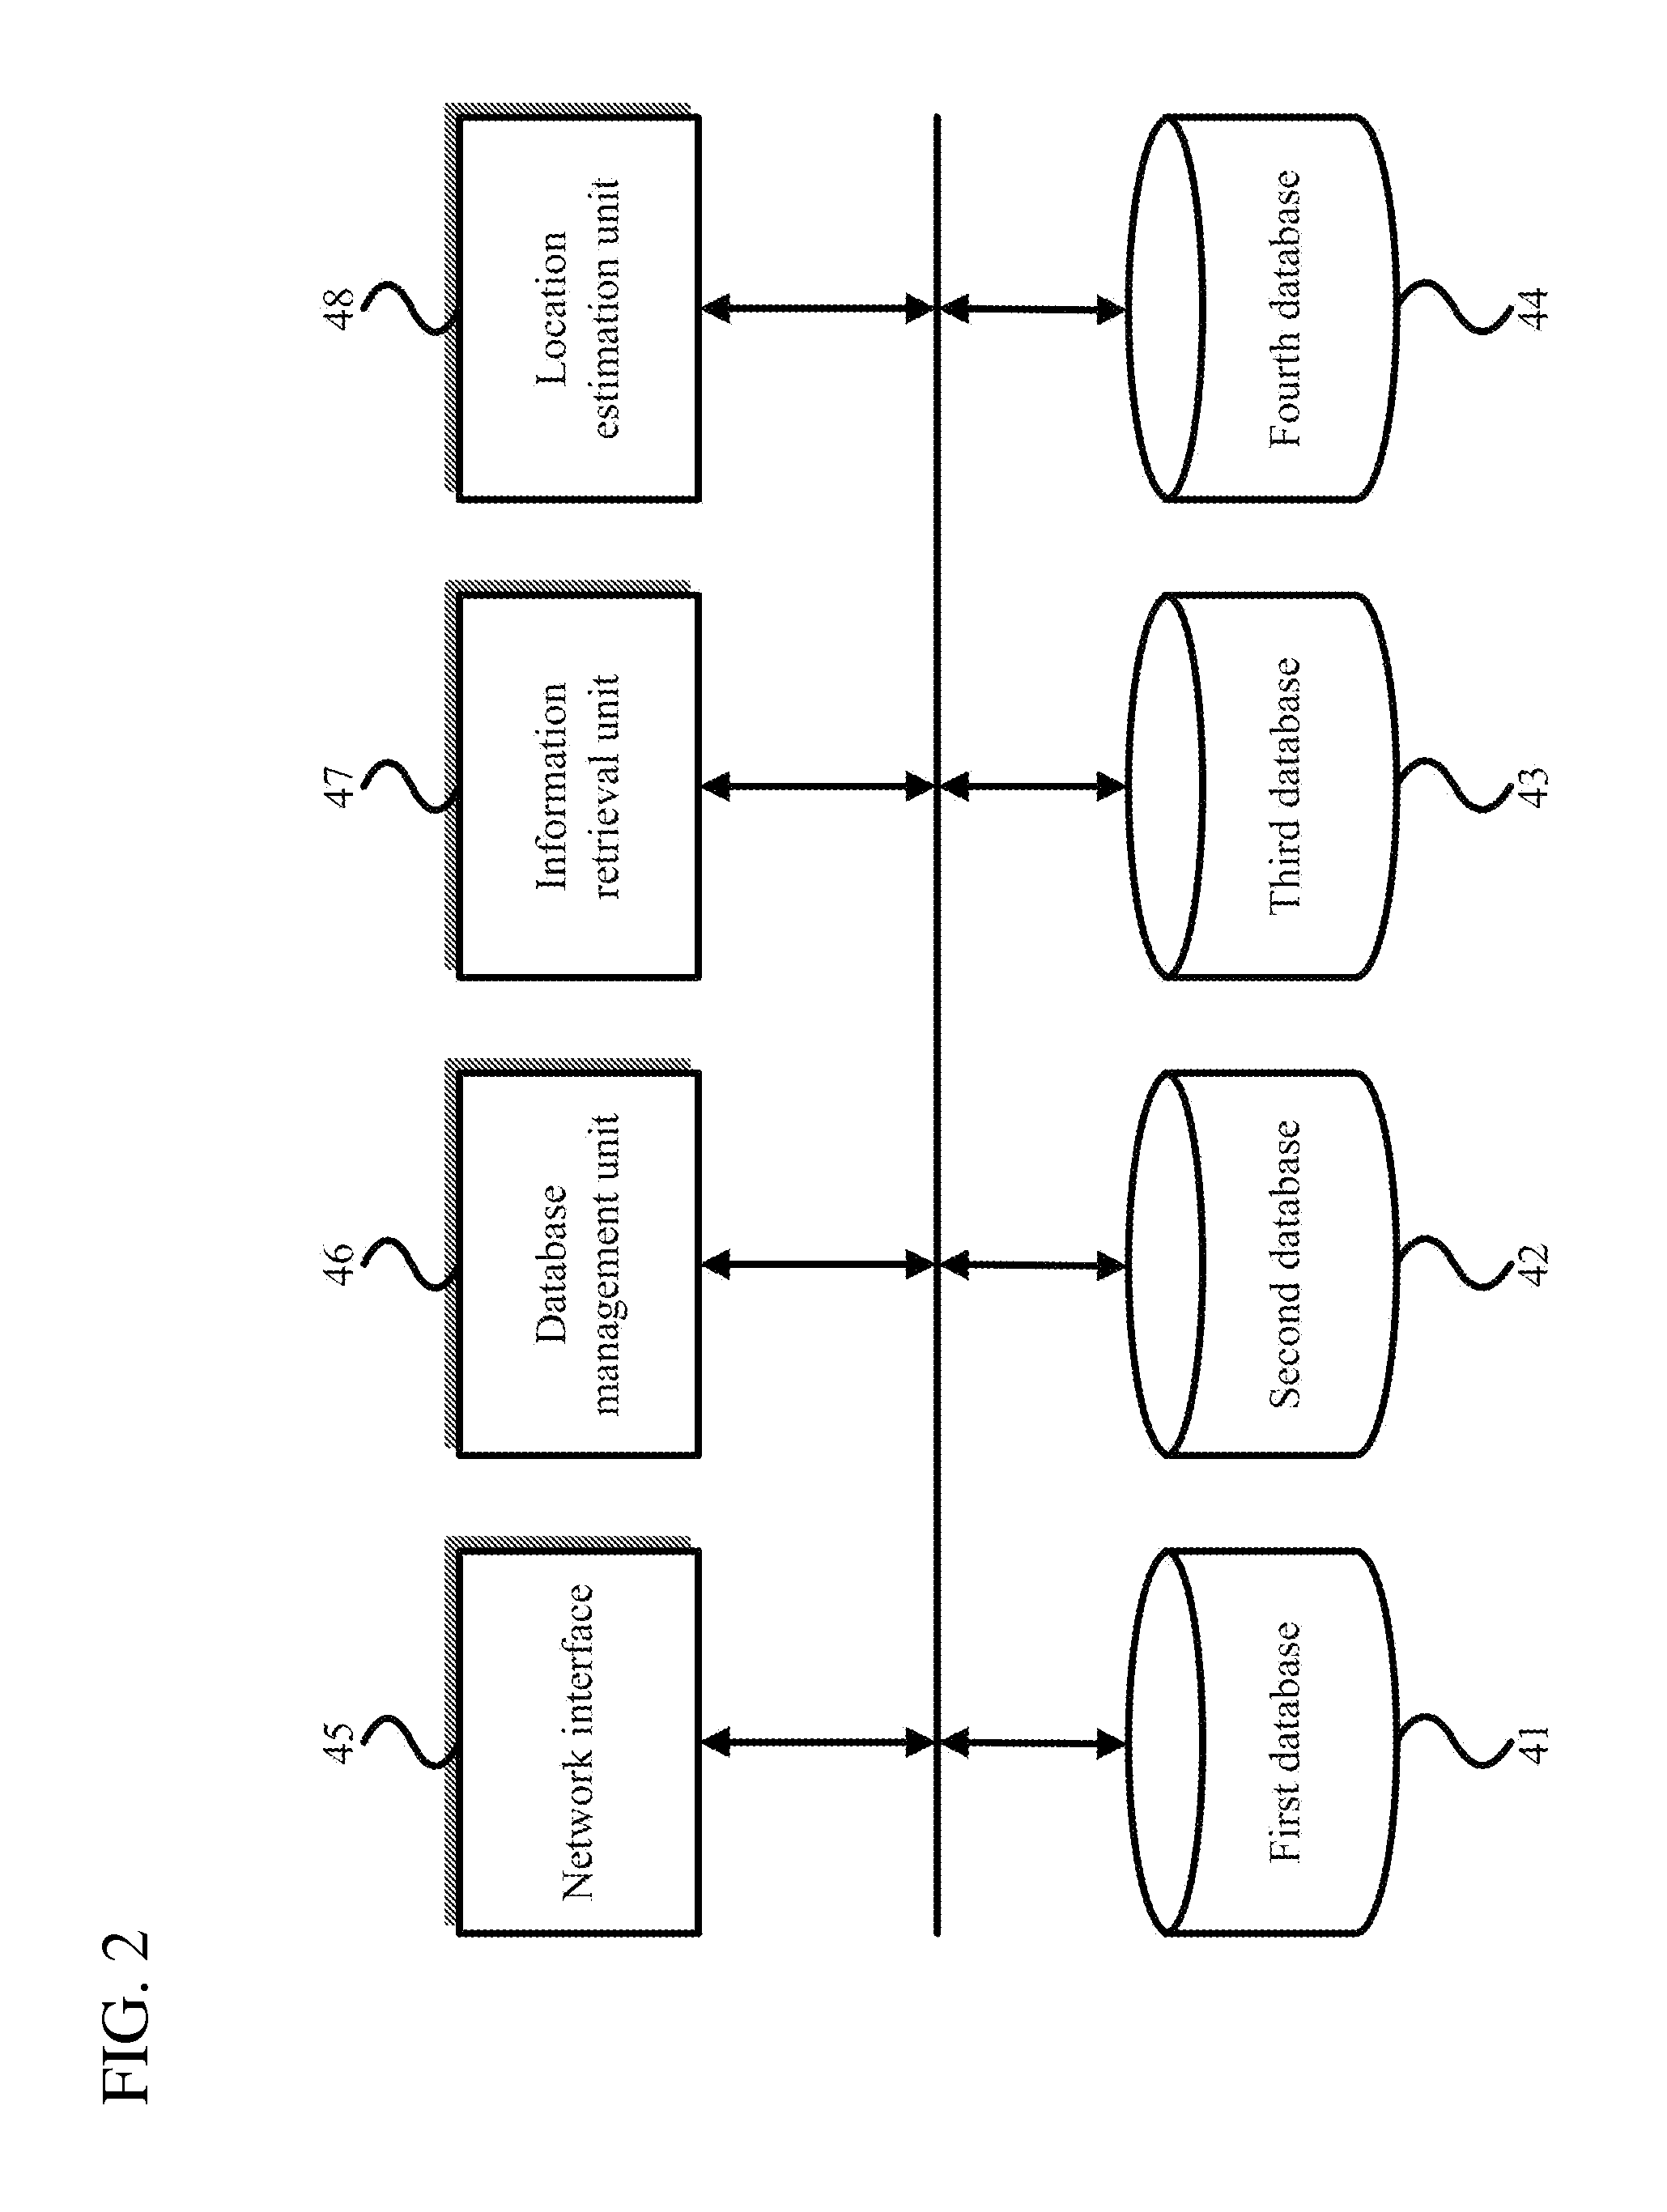 METHOD OF ESTIMATING LOCATION OF MOBILE DEVICE IN TRANSPORTATION USING WiFi